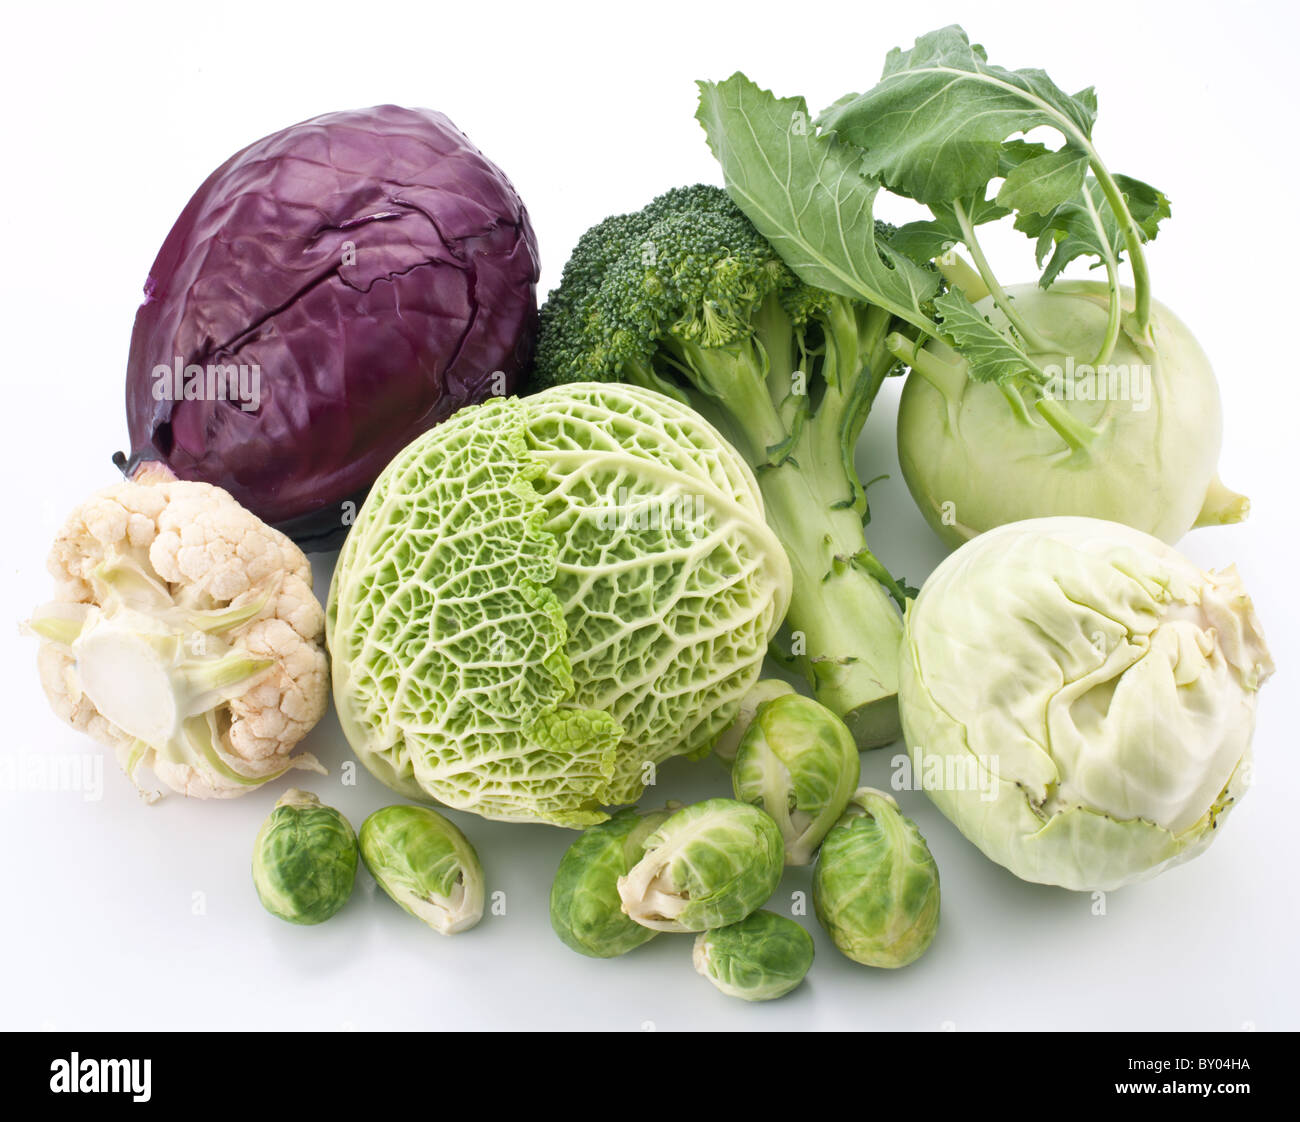 Collection of different varieties of cabbage on a white background. Stock Photo